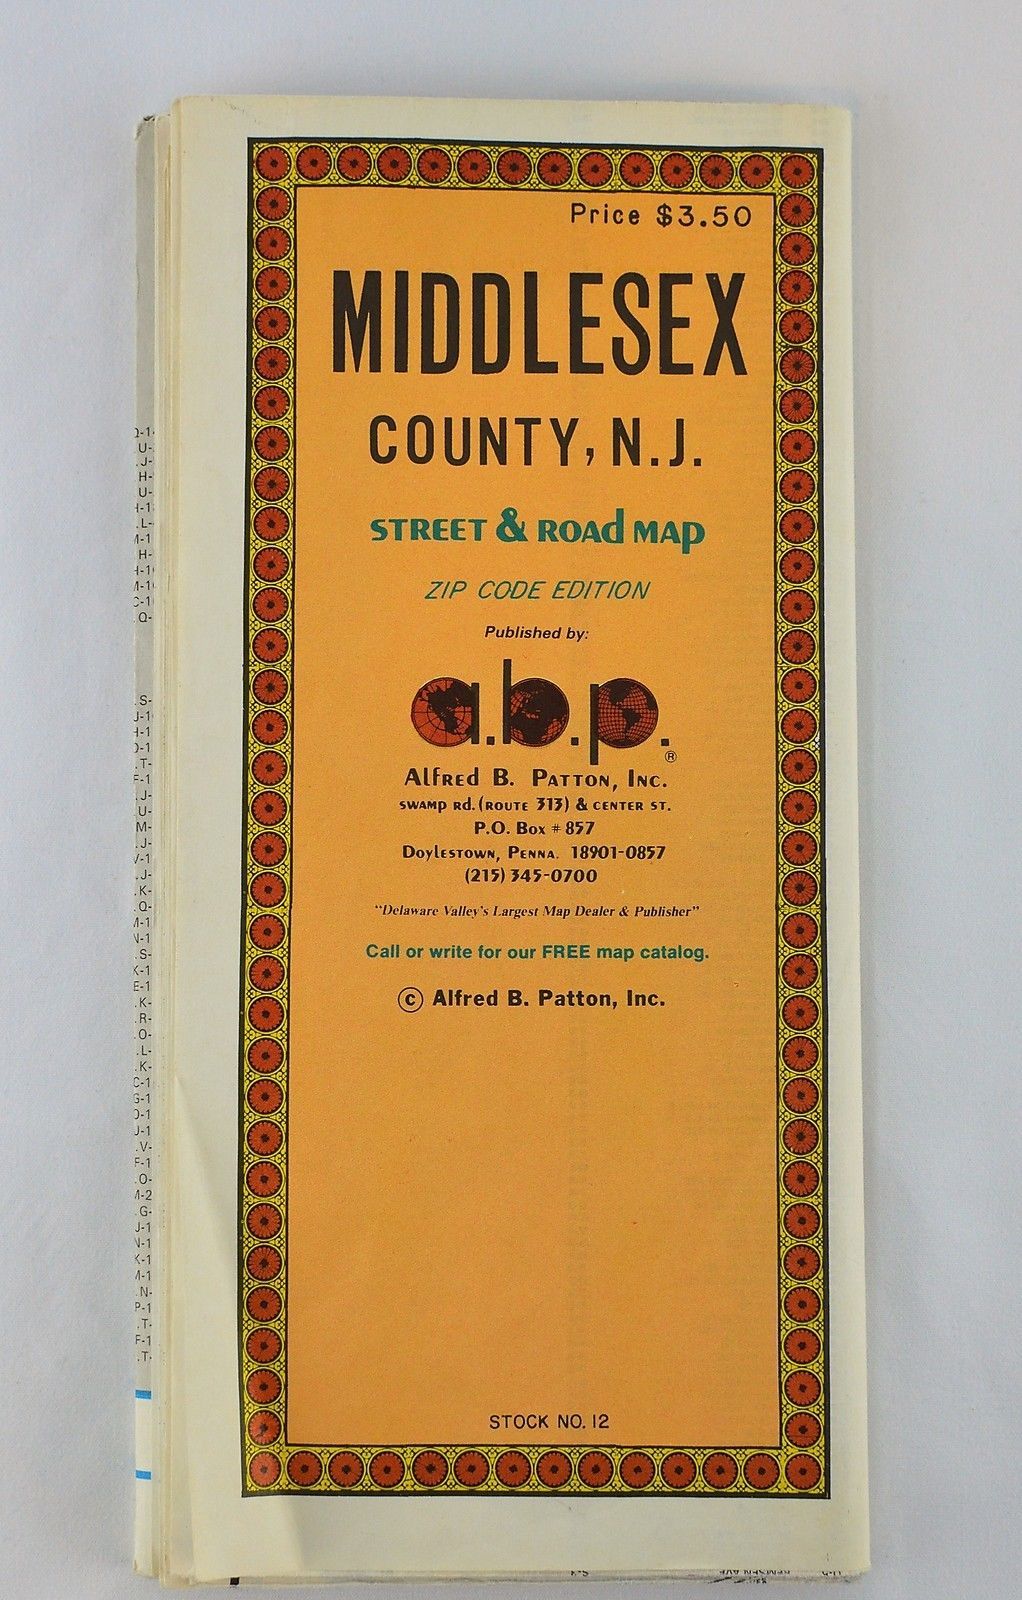 Primary image for NJ Middlesex County Street & Road Map - Alfred B. Patton, Inc.